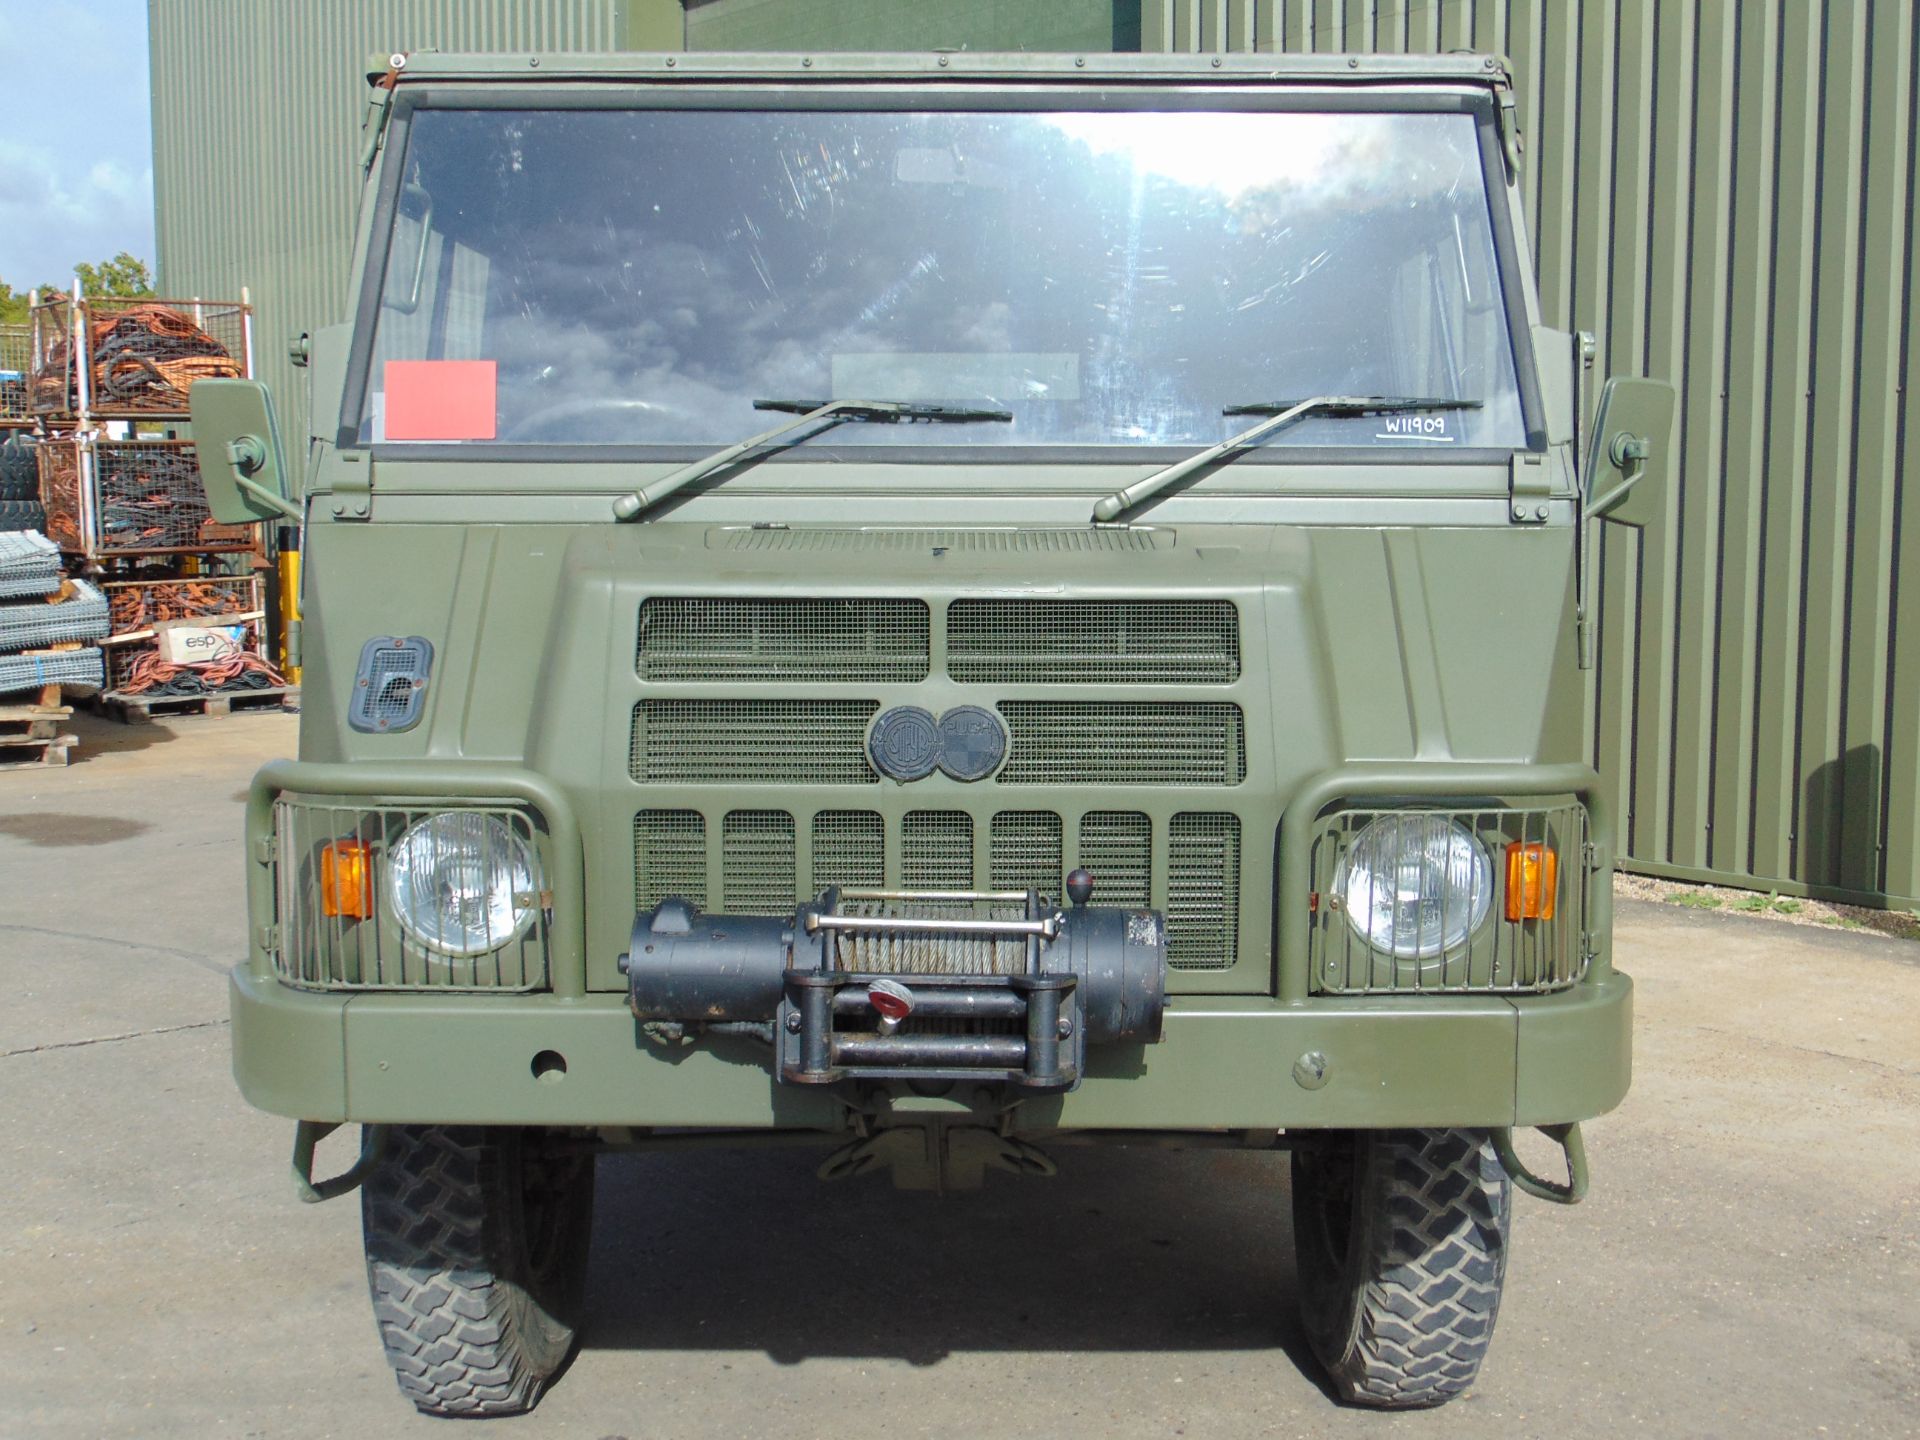 Military Specification Pinzgauer 716 4X4 Soft Top ONLY 26,686 MILES! - Image 3 of 37